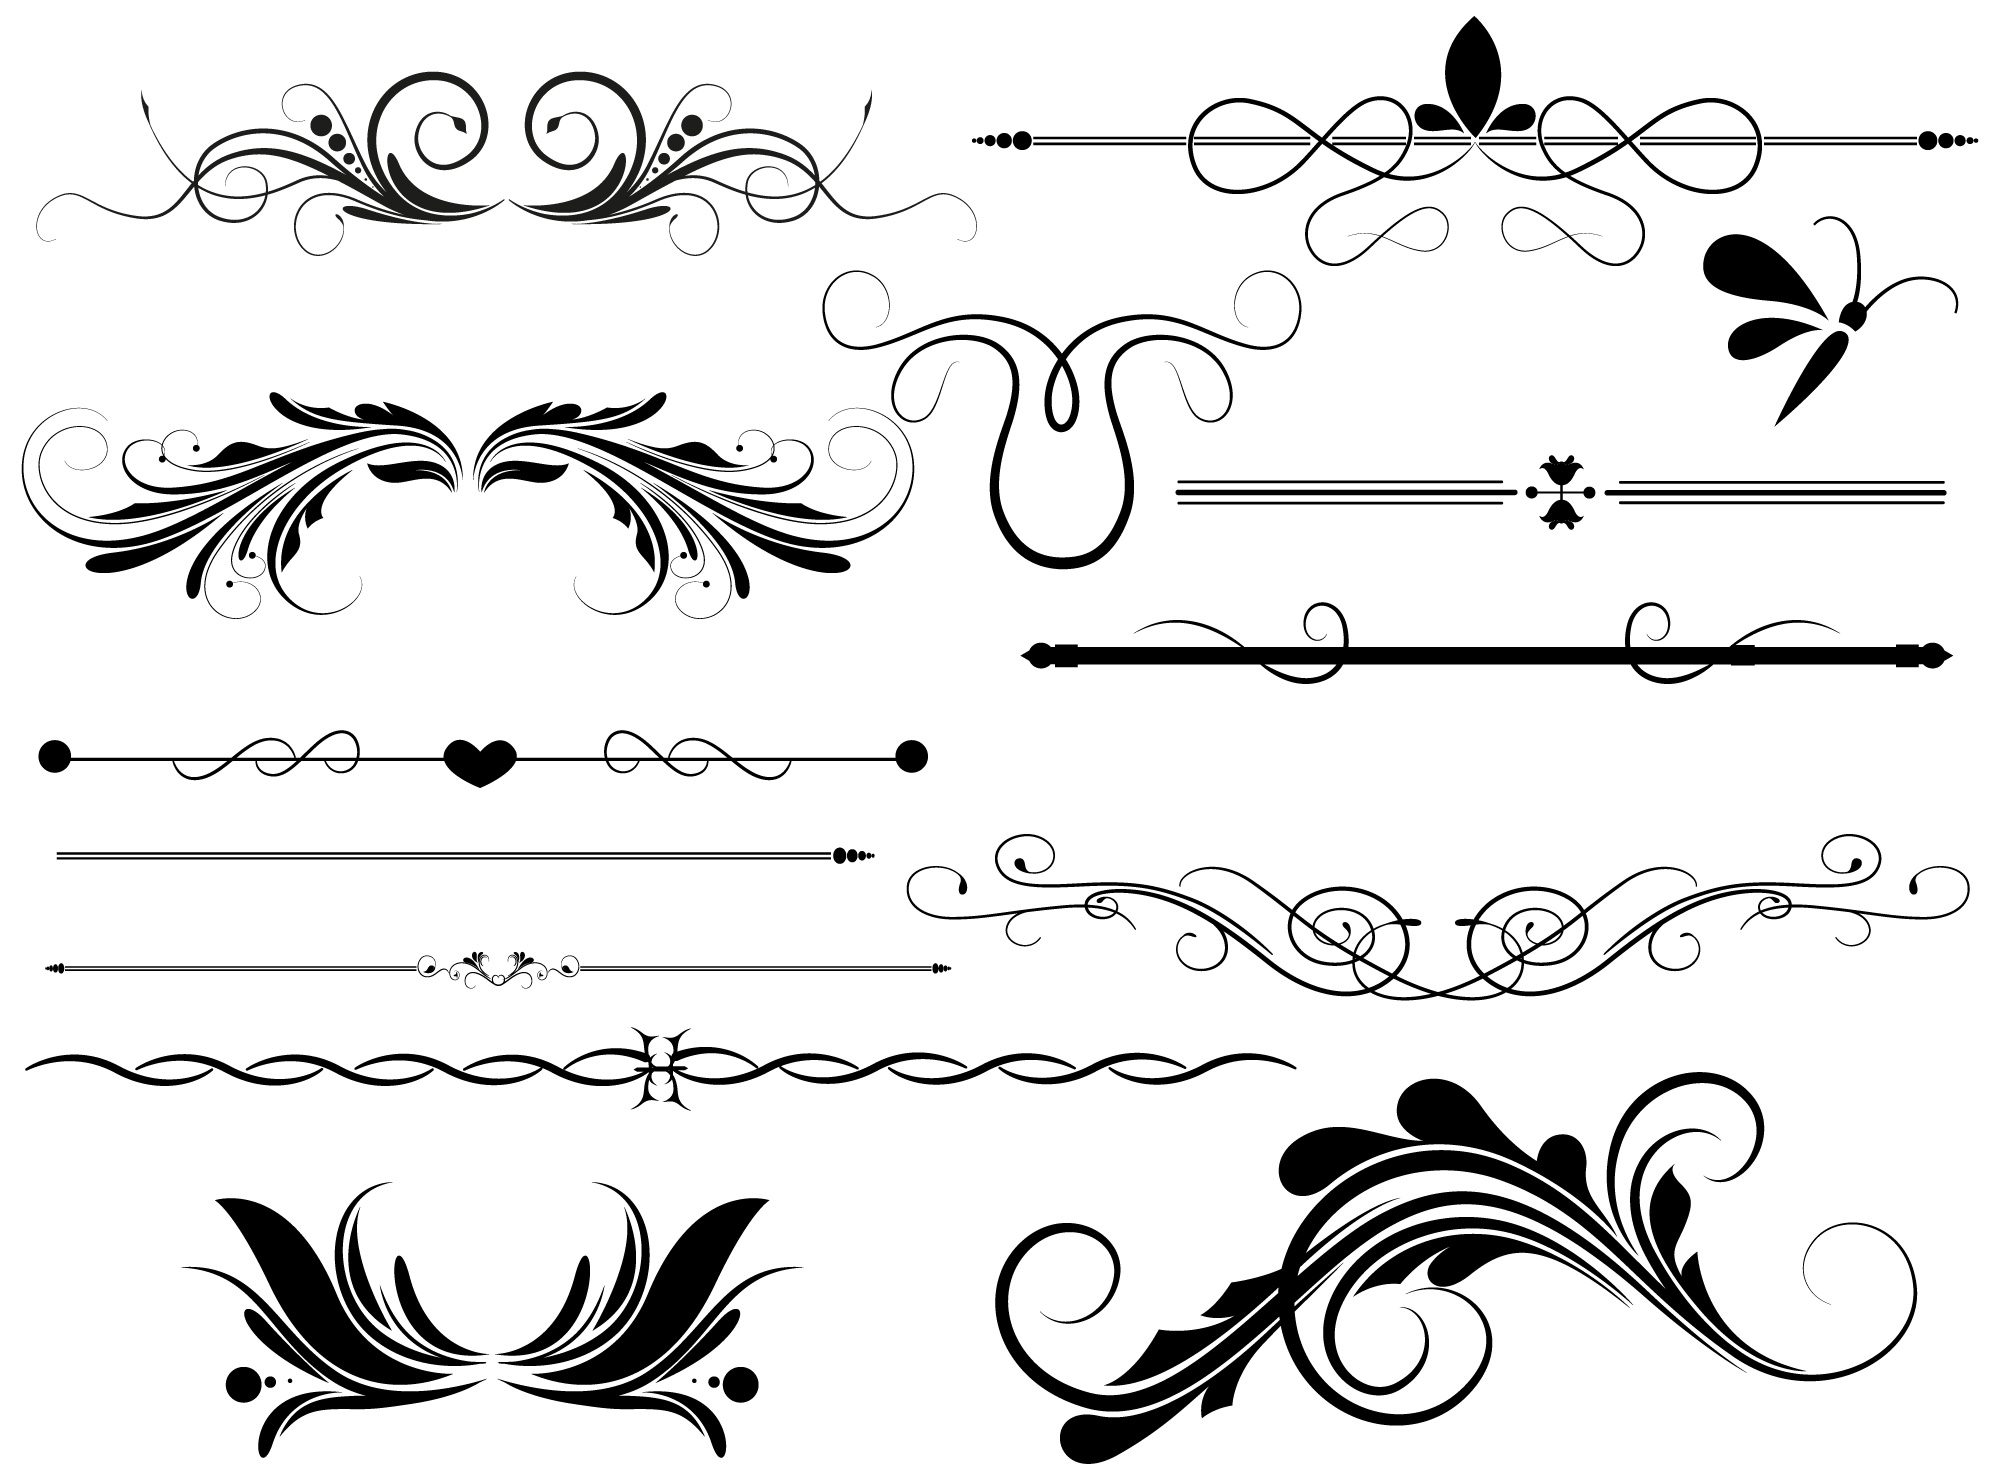 Free Photoshop: Divider & Page Decoration Vectors Designs Brushes ...